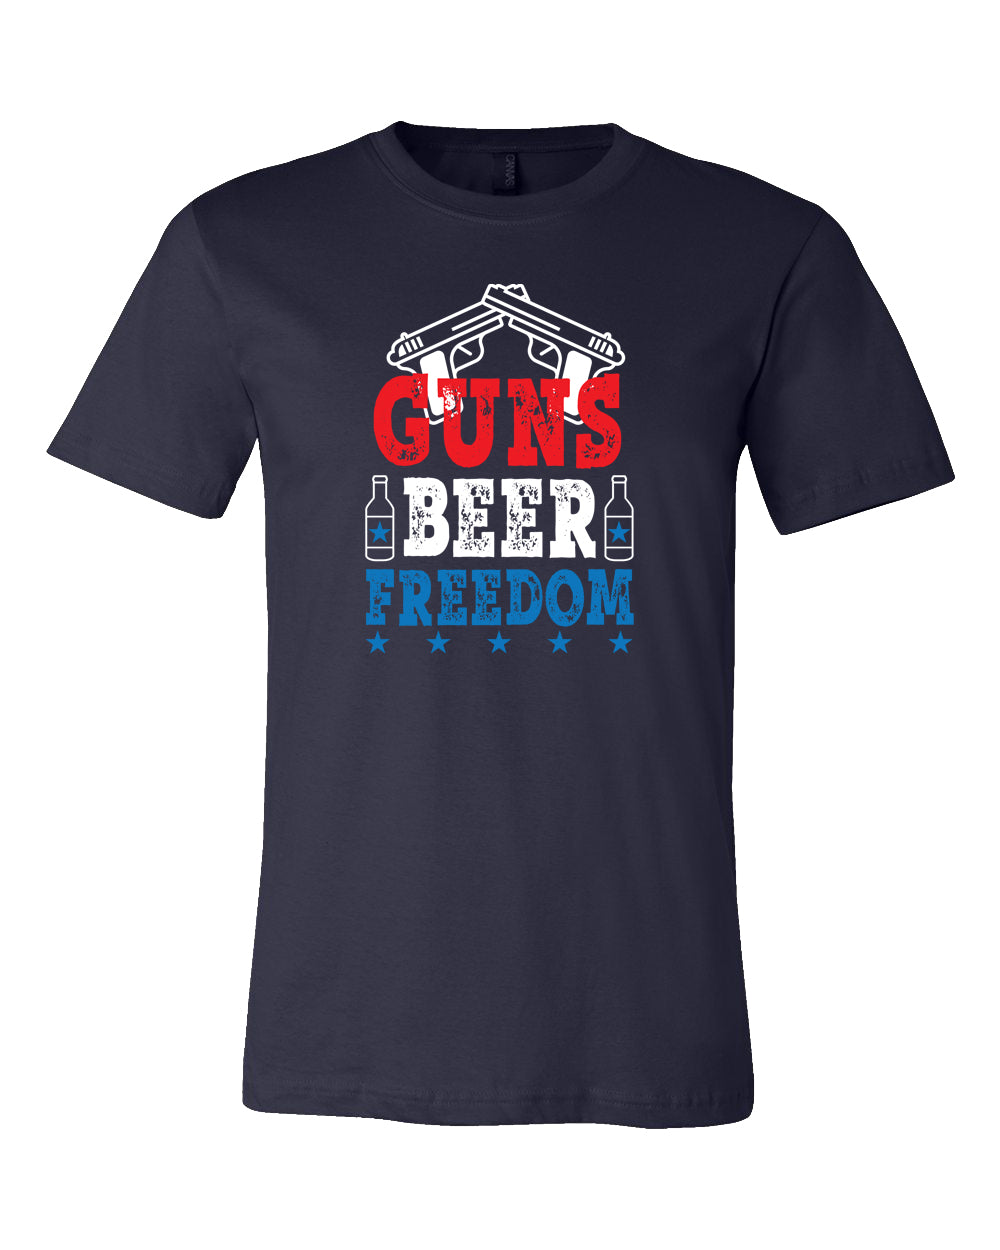 Guns Freedom Beer - Unisex Jersey Tee - Clearance